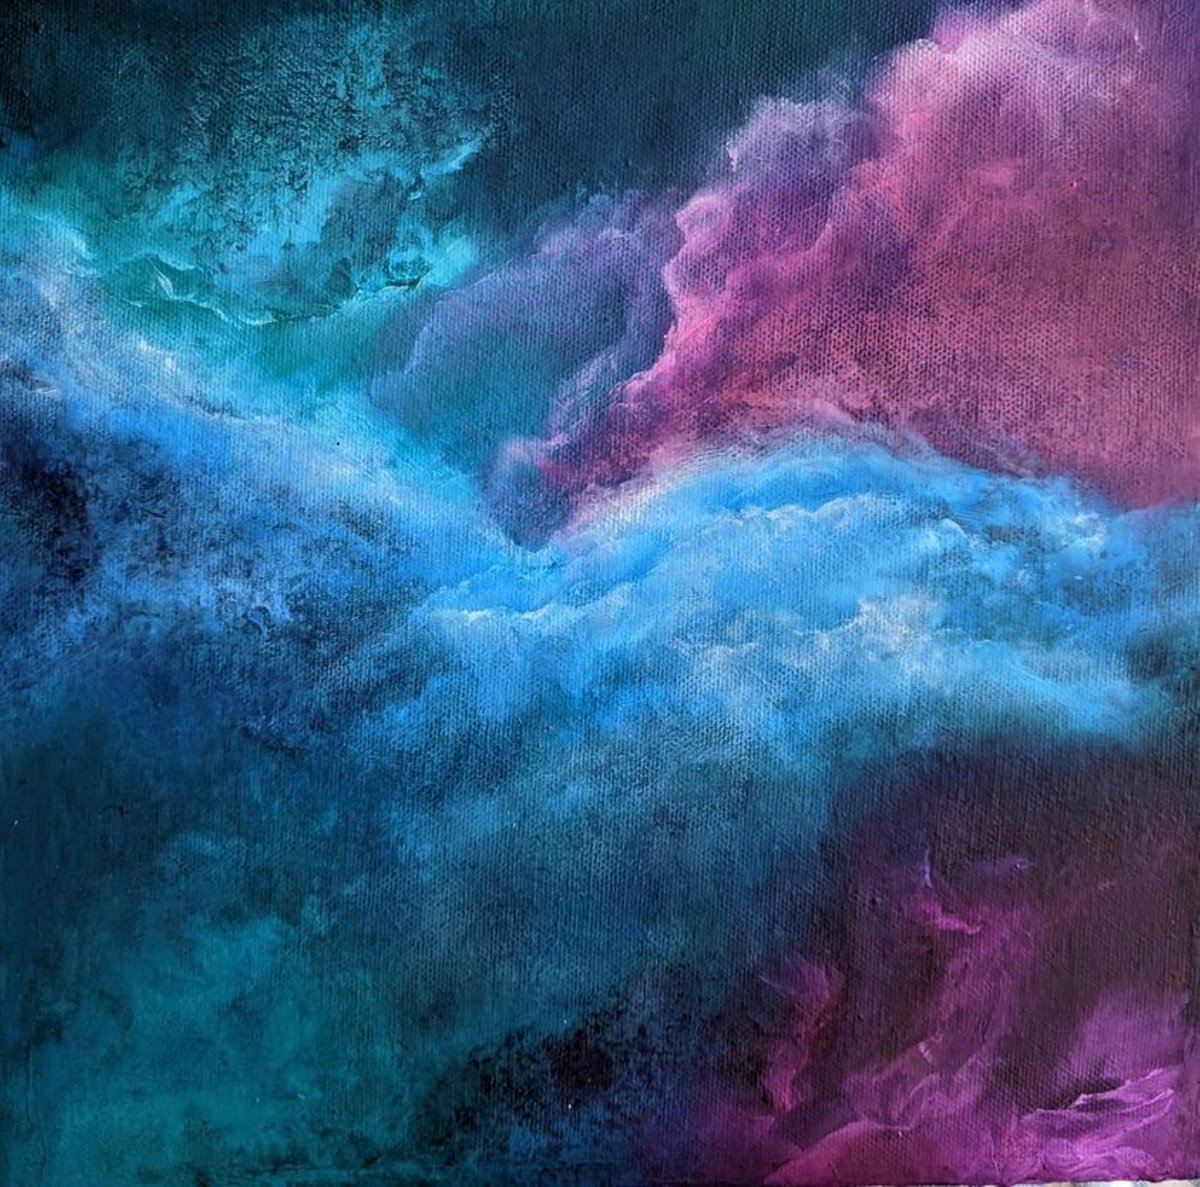 Skybound - Abstracted Finger Painted Nebula / Clouds by Lisa Price